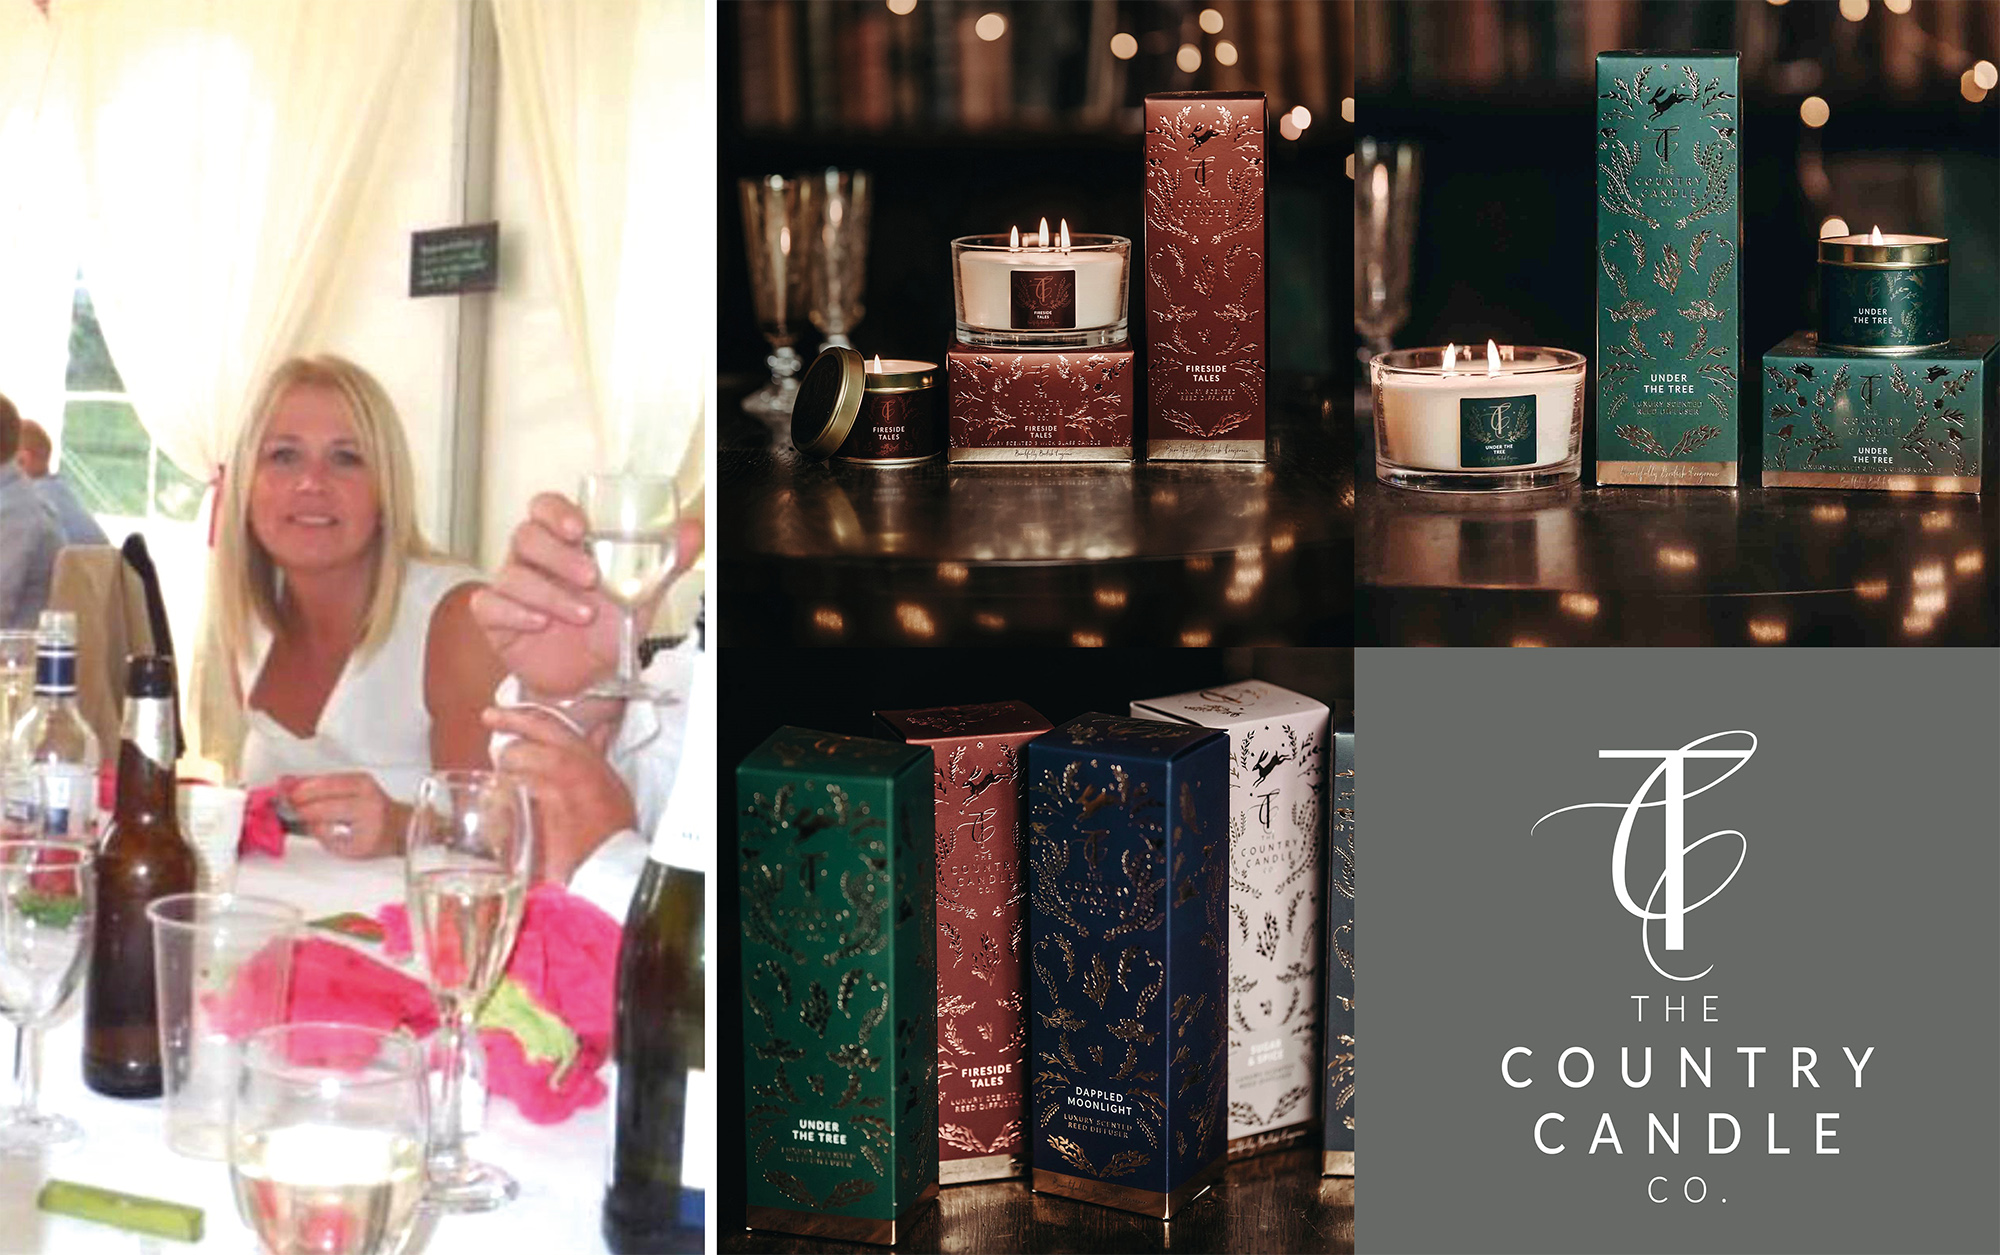 New face for The Country Candle Co. - Gifts Today